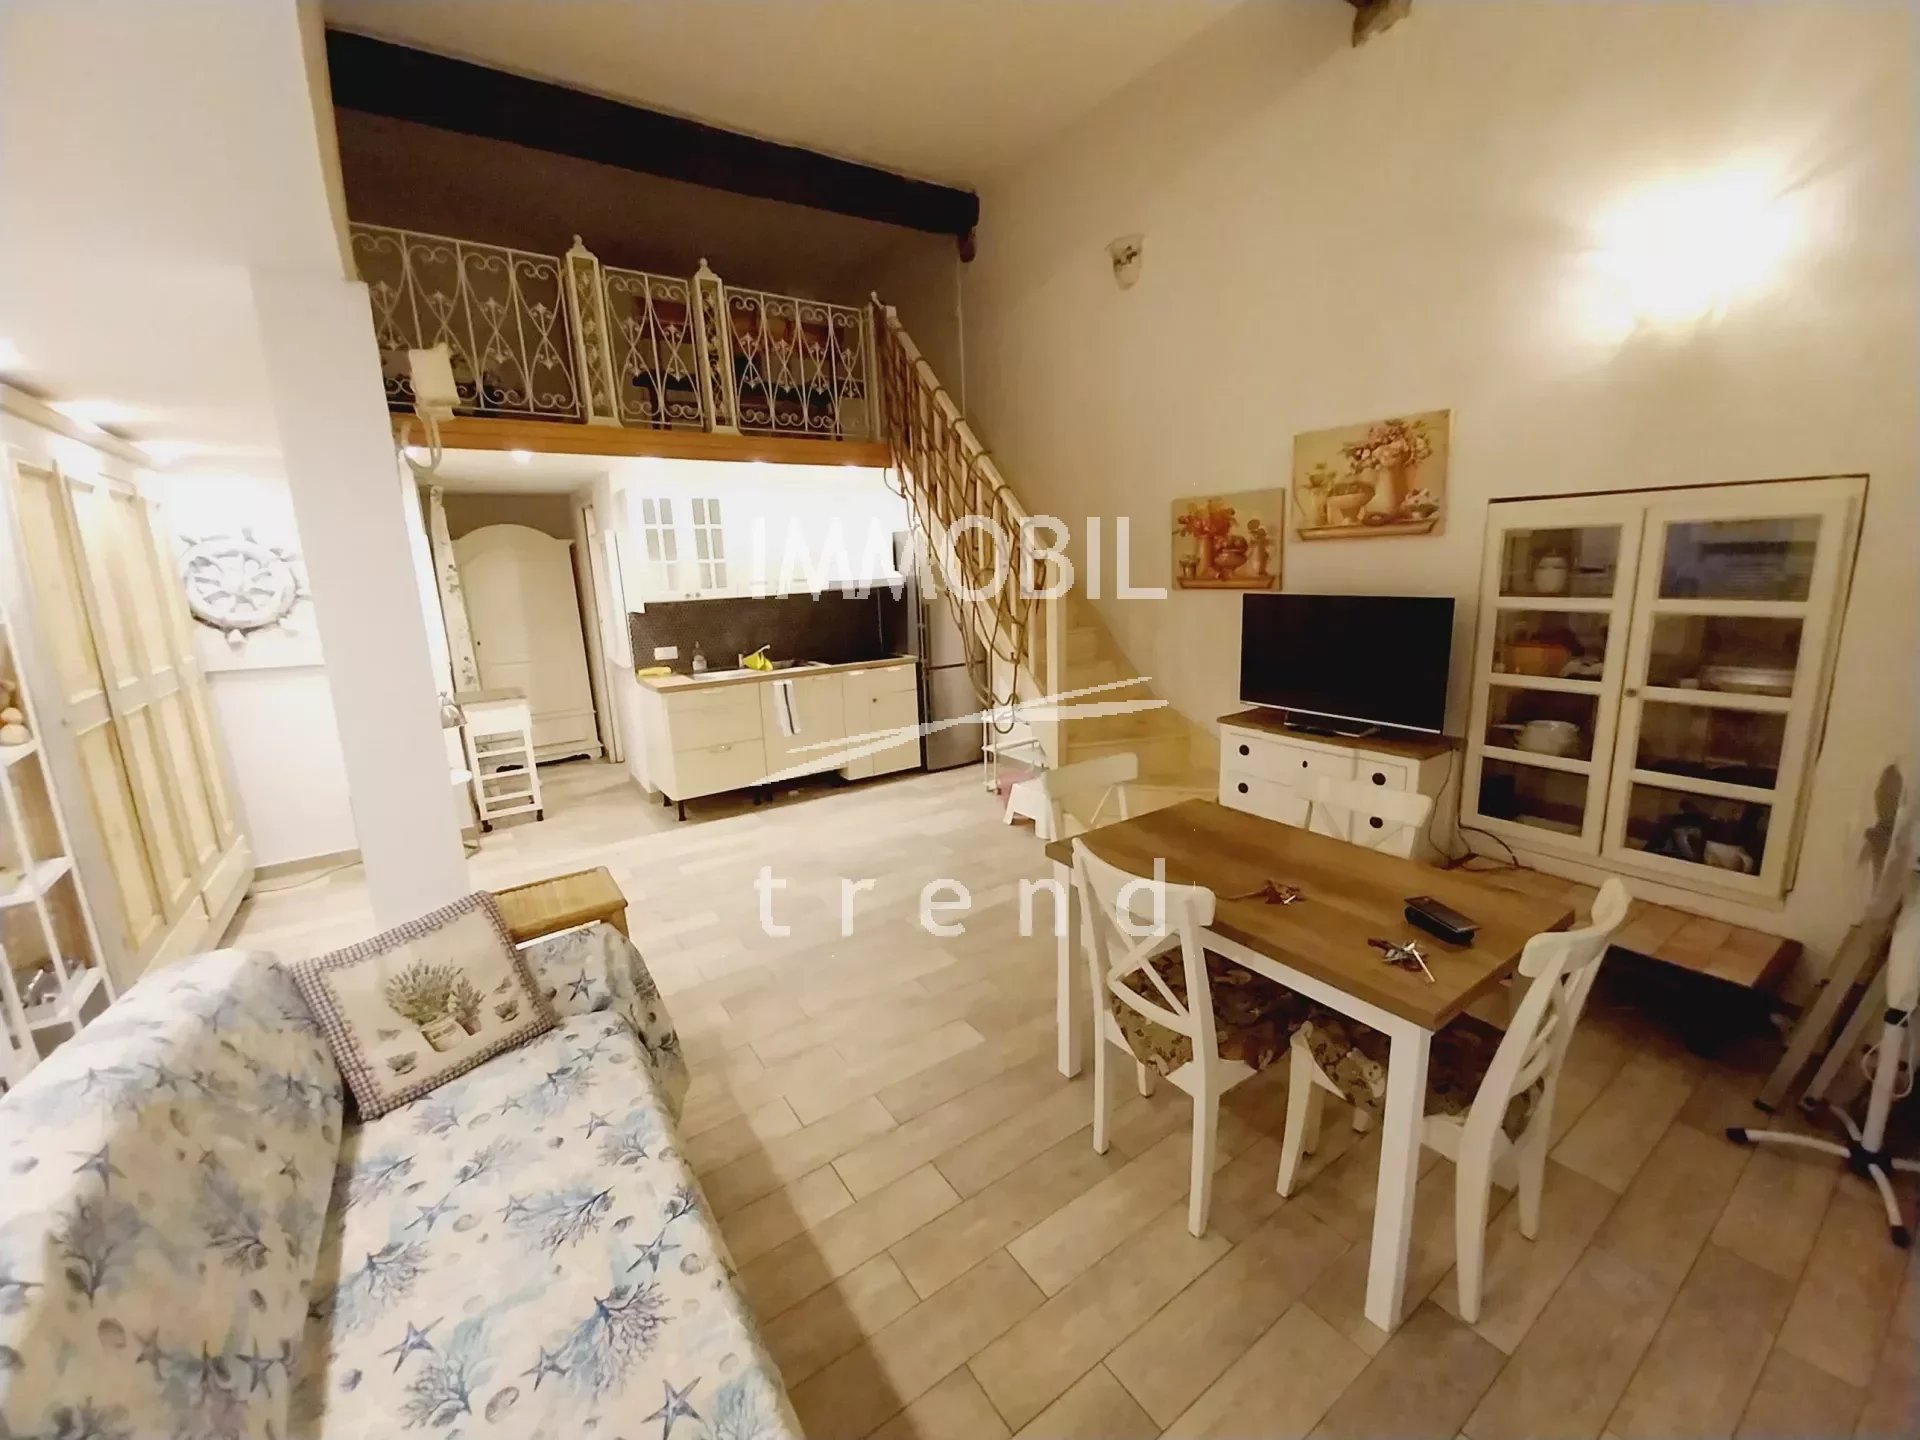 MENTON OLD TOWN - APPARTEMENT IN LOFT STYLE IN EXCELLENT CONDITION